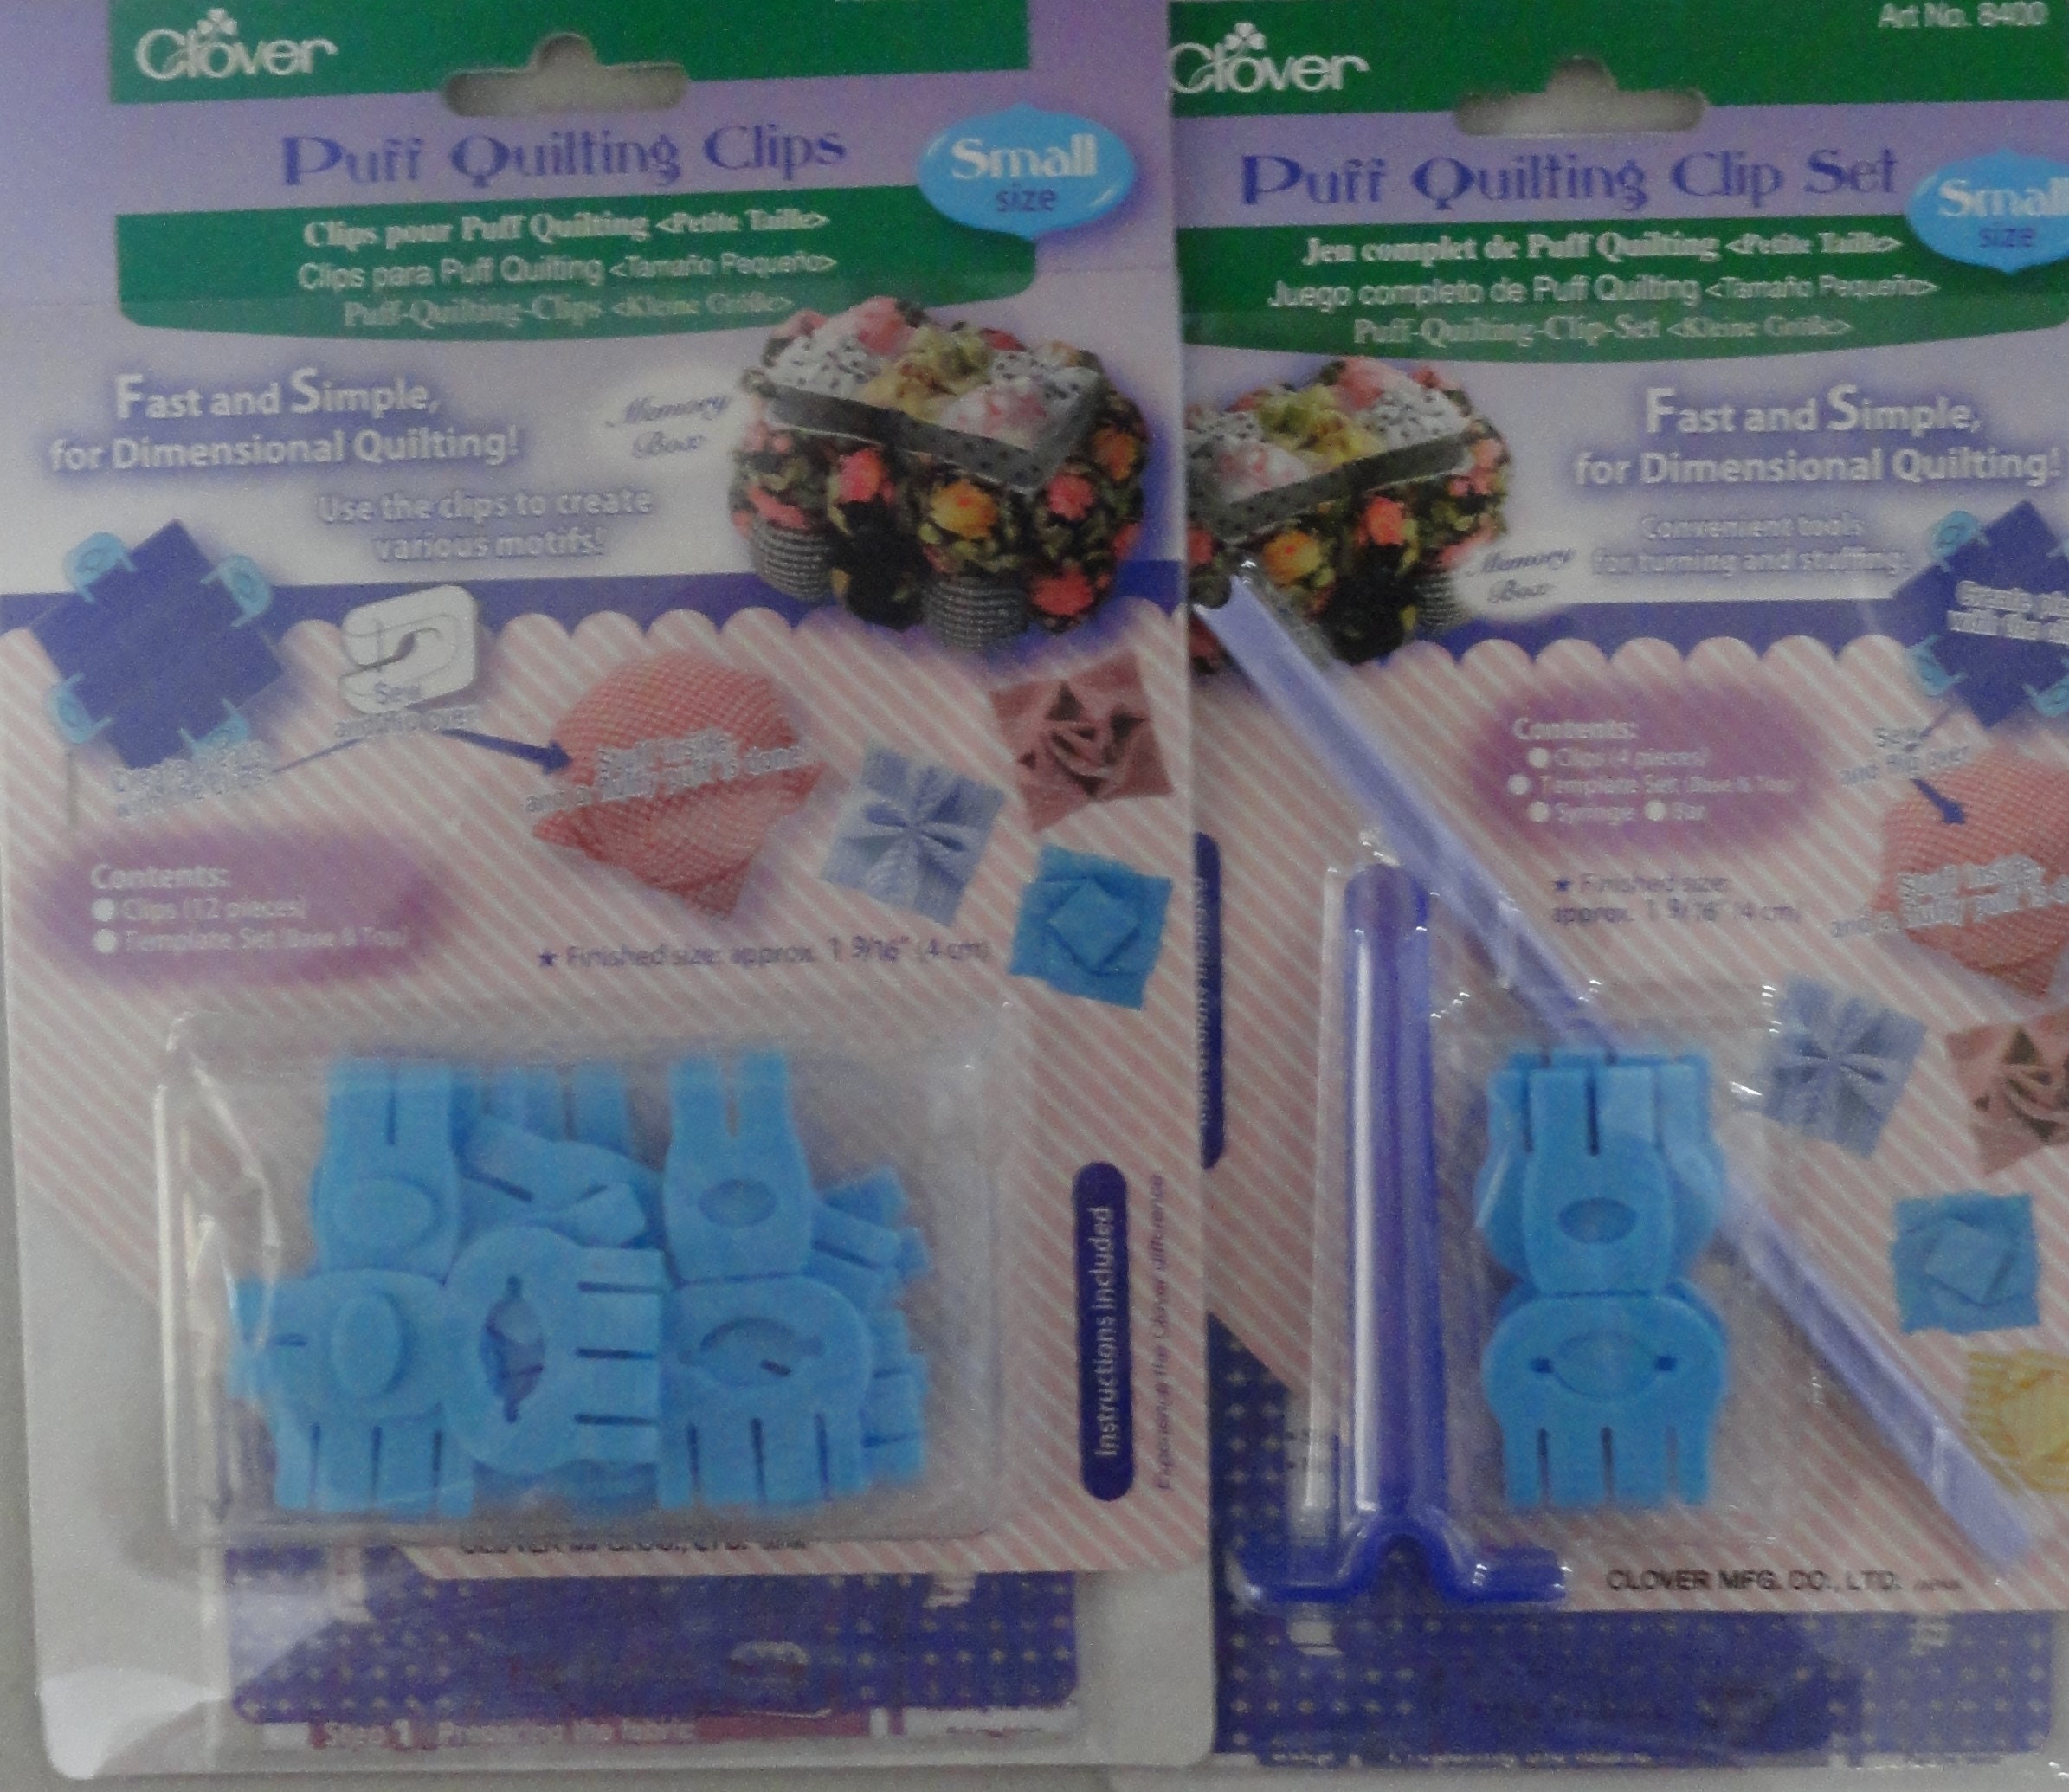 Clover Puff Quilting Clips Set 4 tools in 1 Large 8401